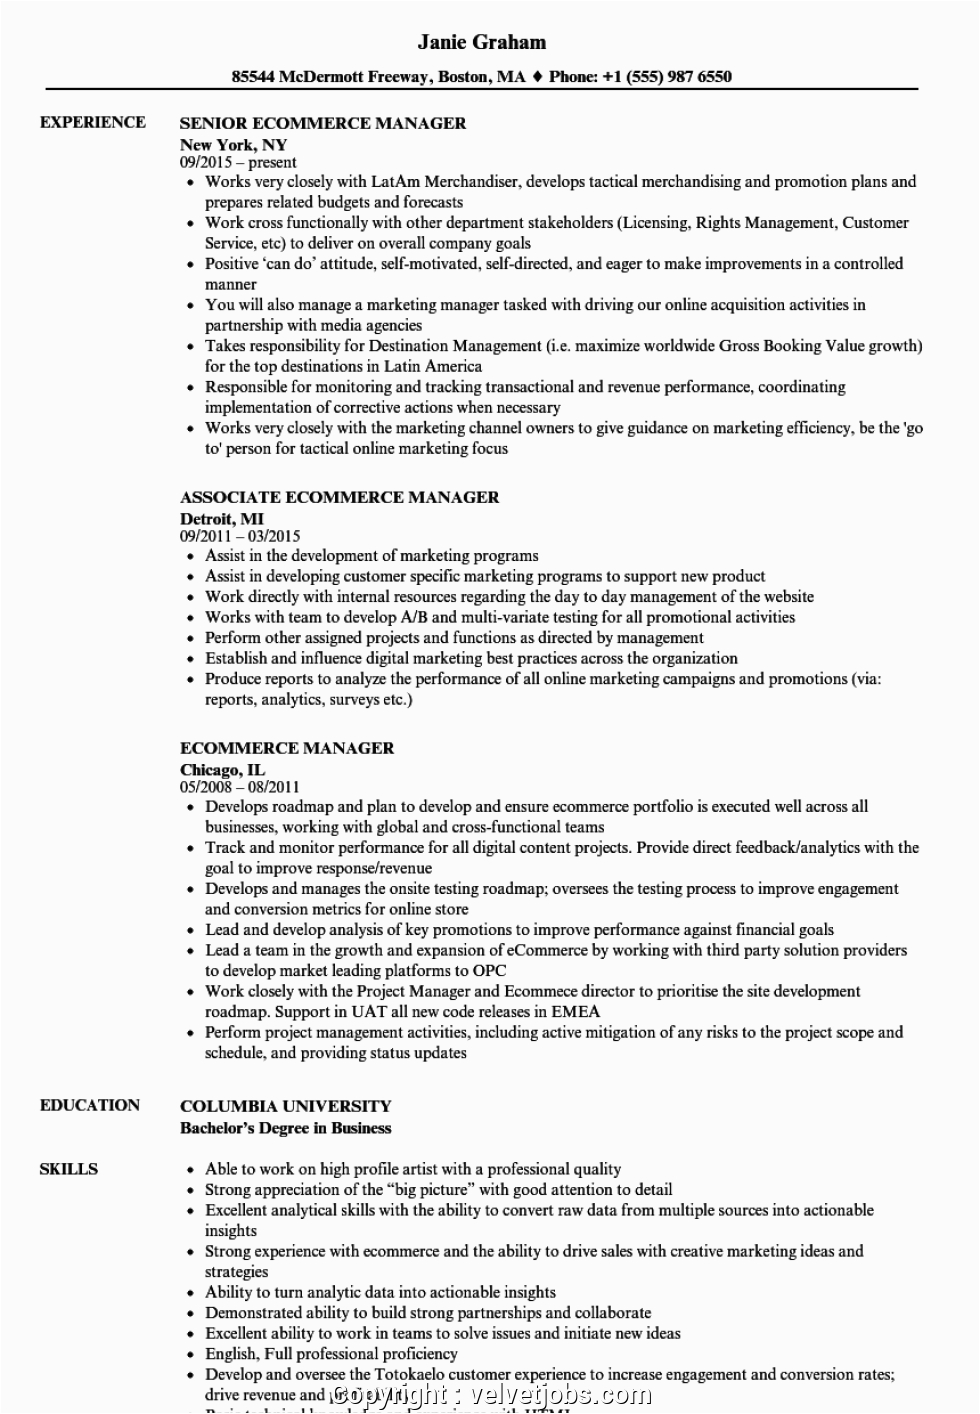 Sample Resume for Ecommerce Operations Manager Professional E Merce Manager Resume E Merce Manager